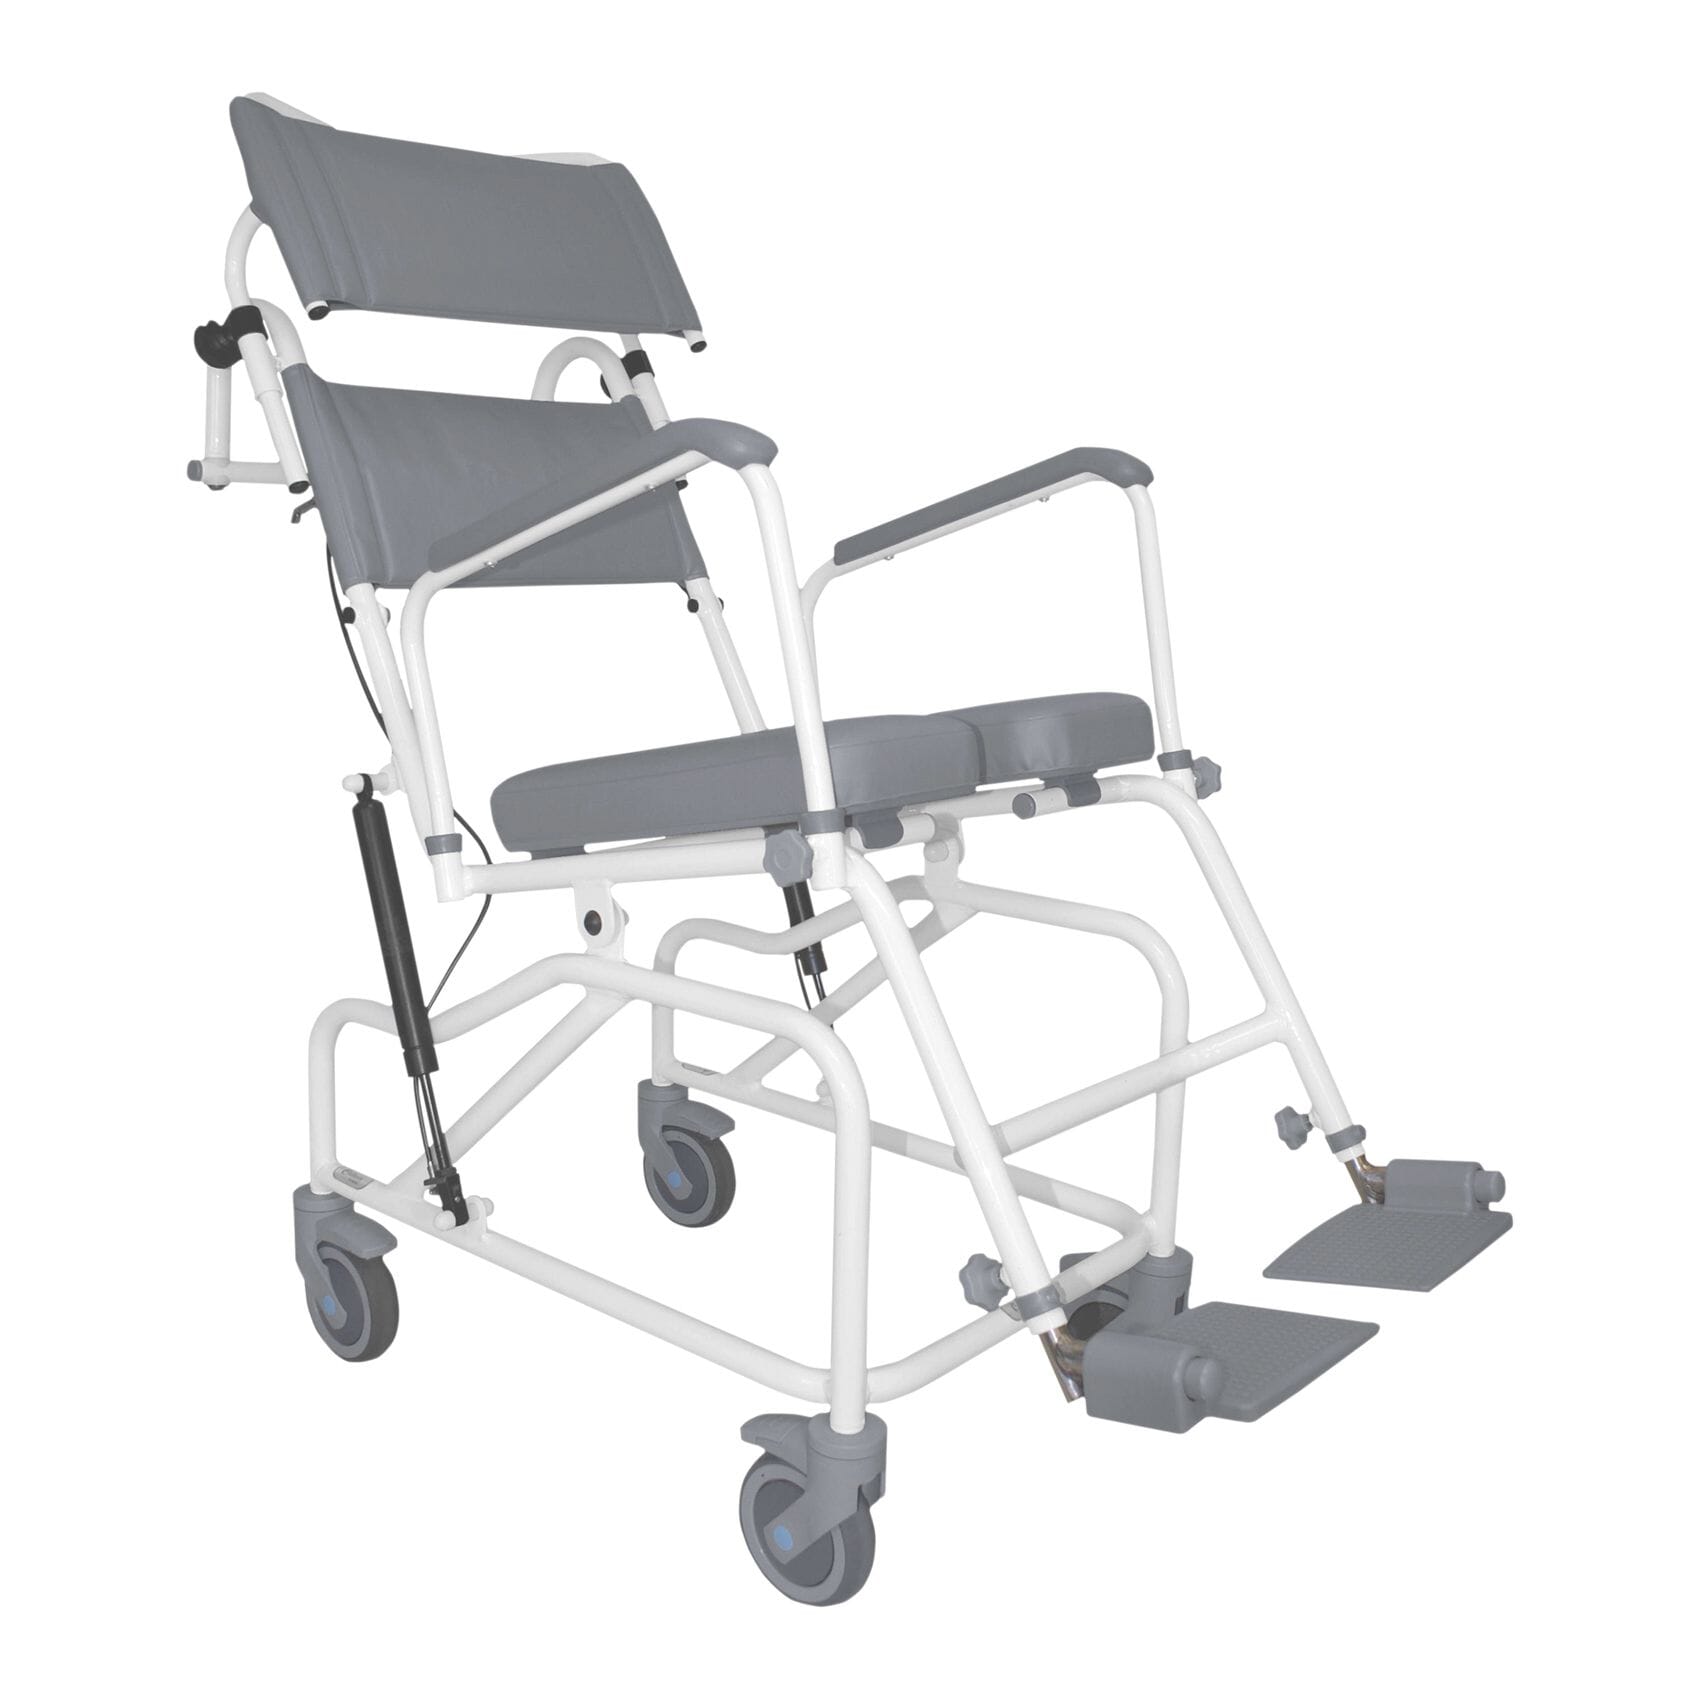 View Aquamaster Tilt in Space Shower Chair information